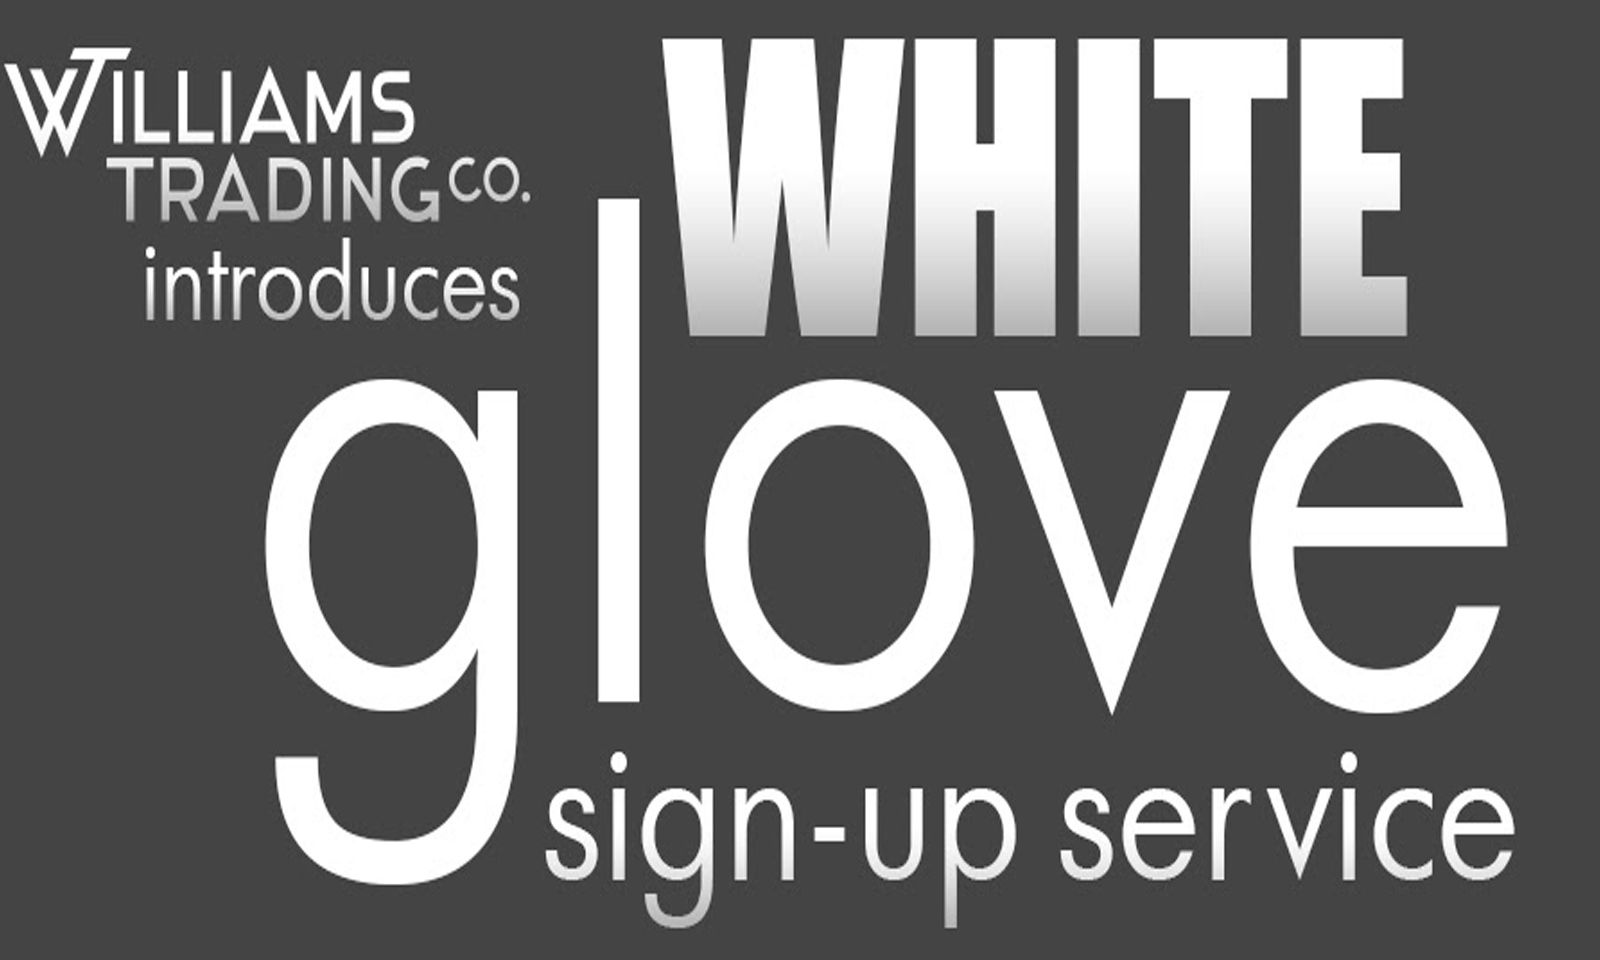 Williams Trading Co. Introduces White Glove Sign Up Service